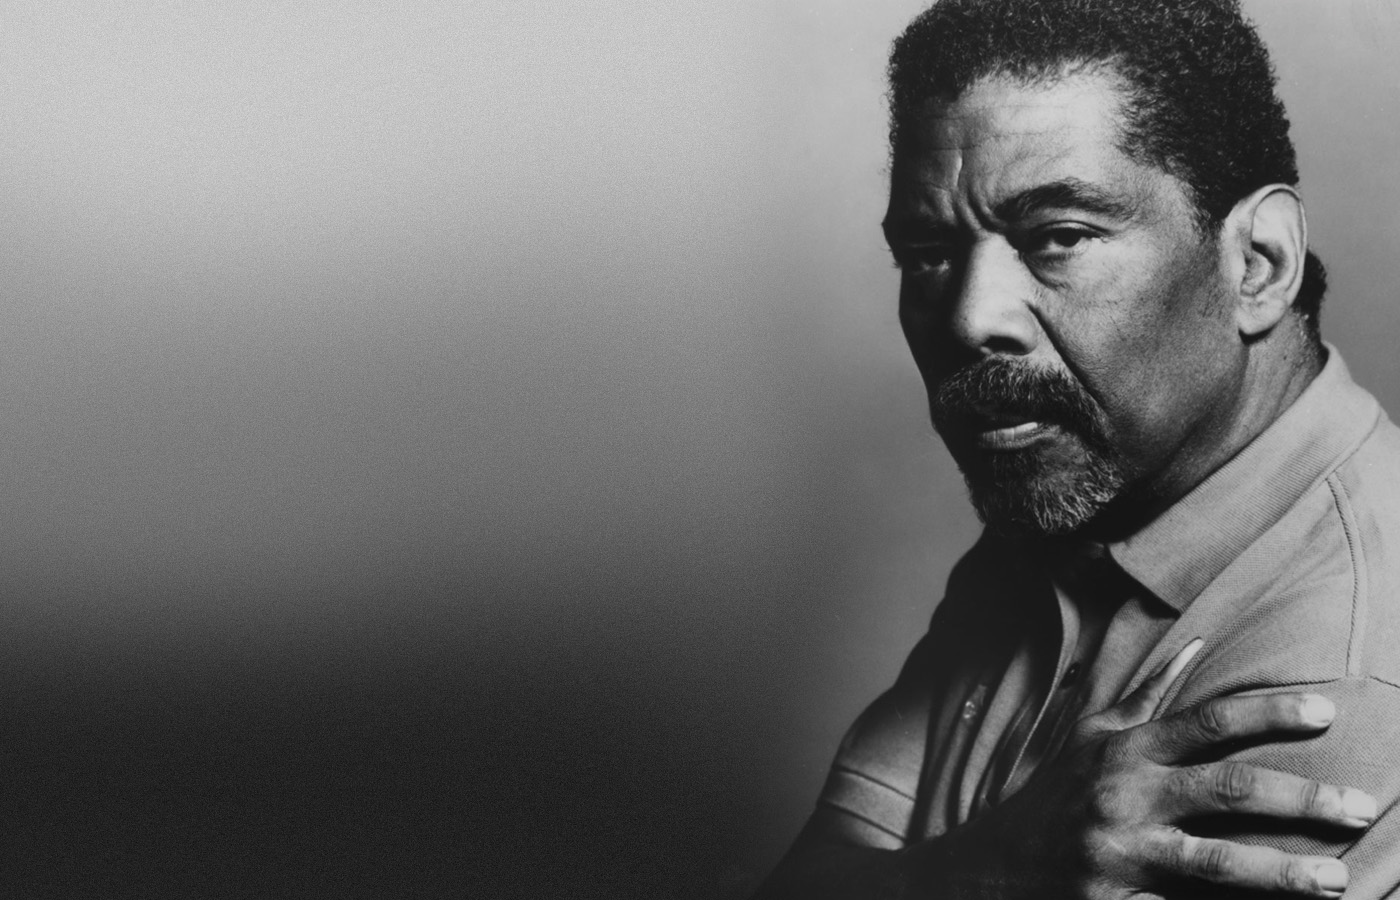 Alvin Ailey and the Importance of the Arts.